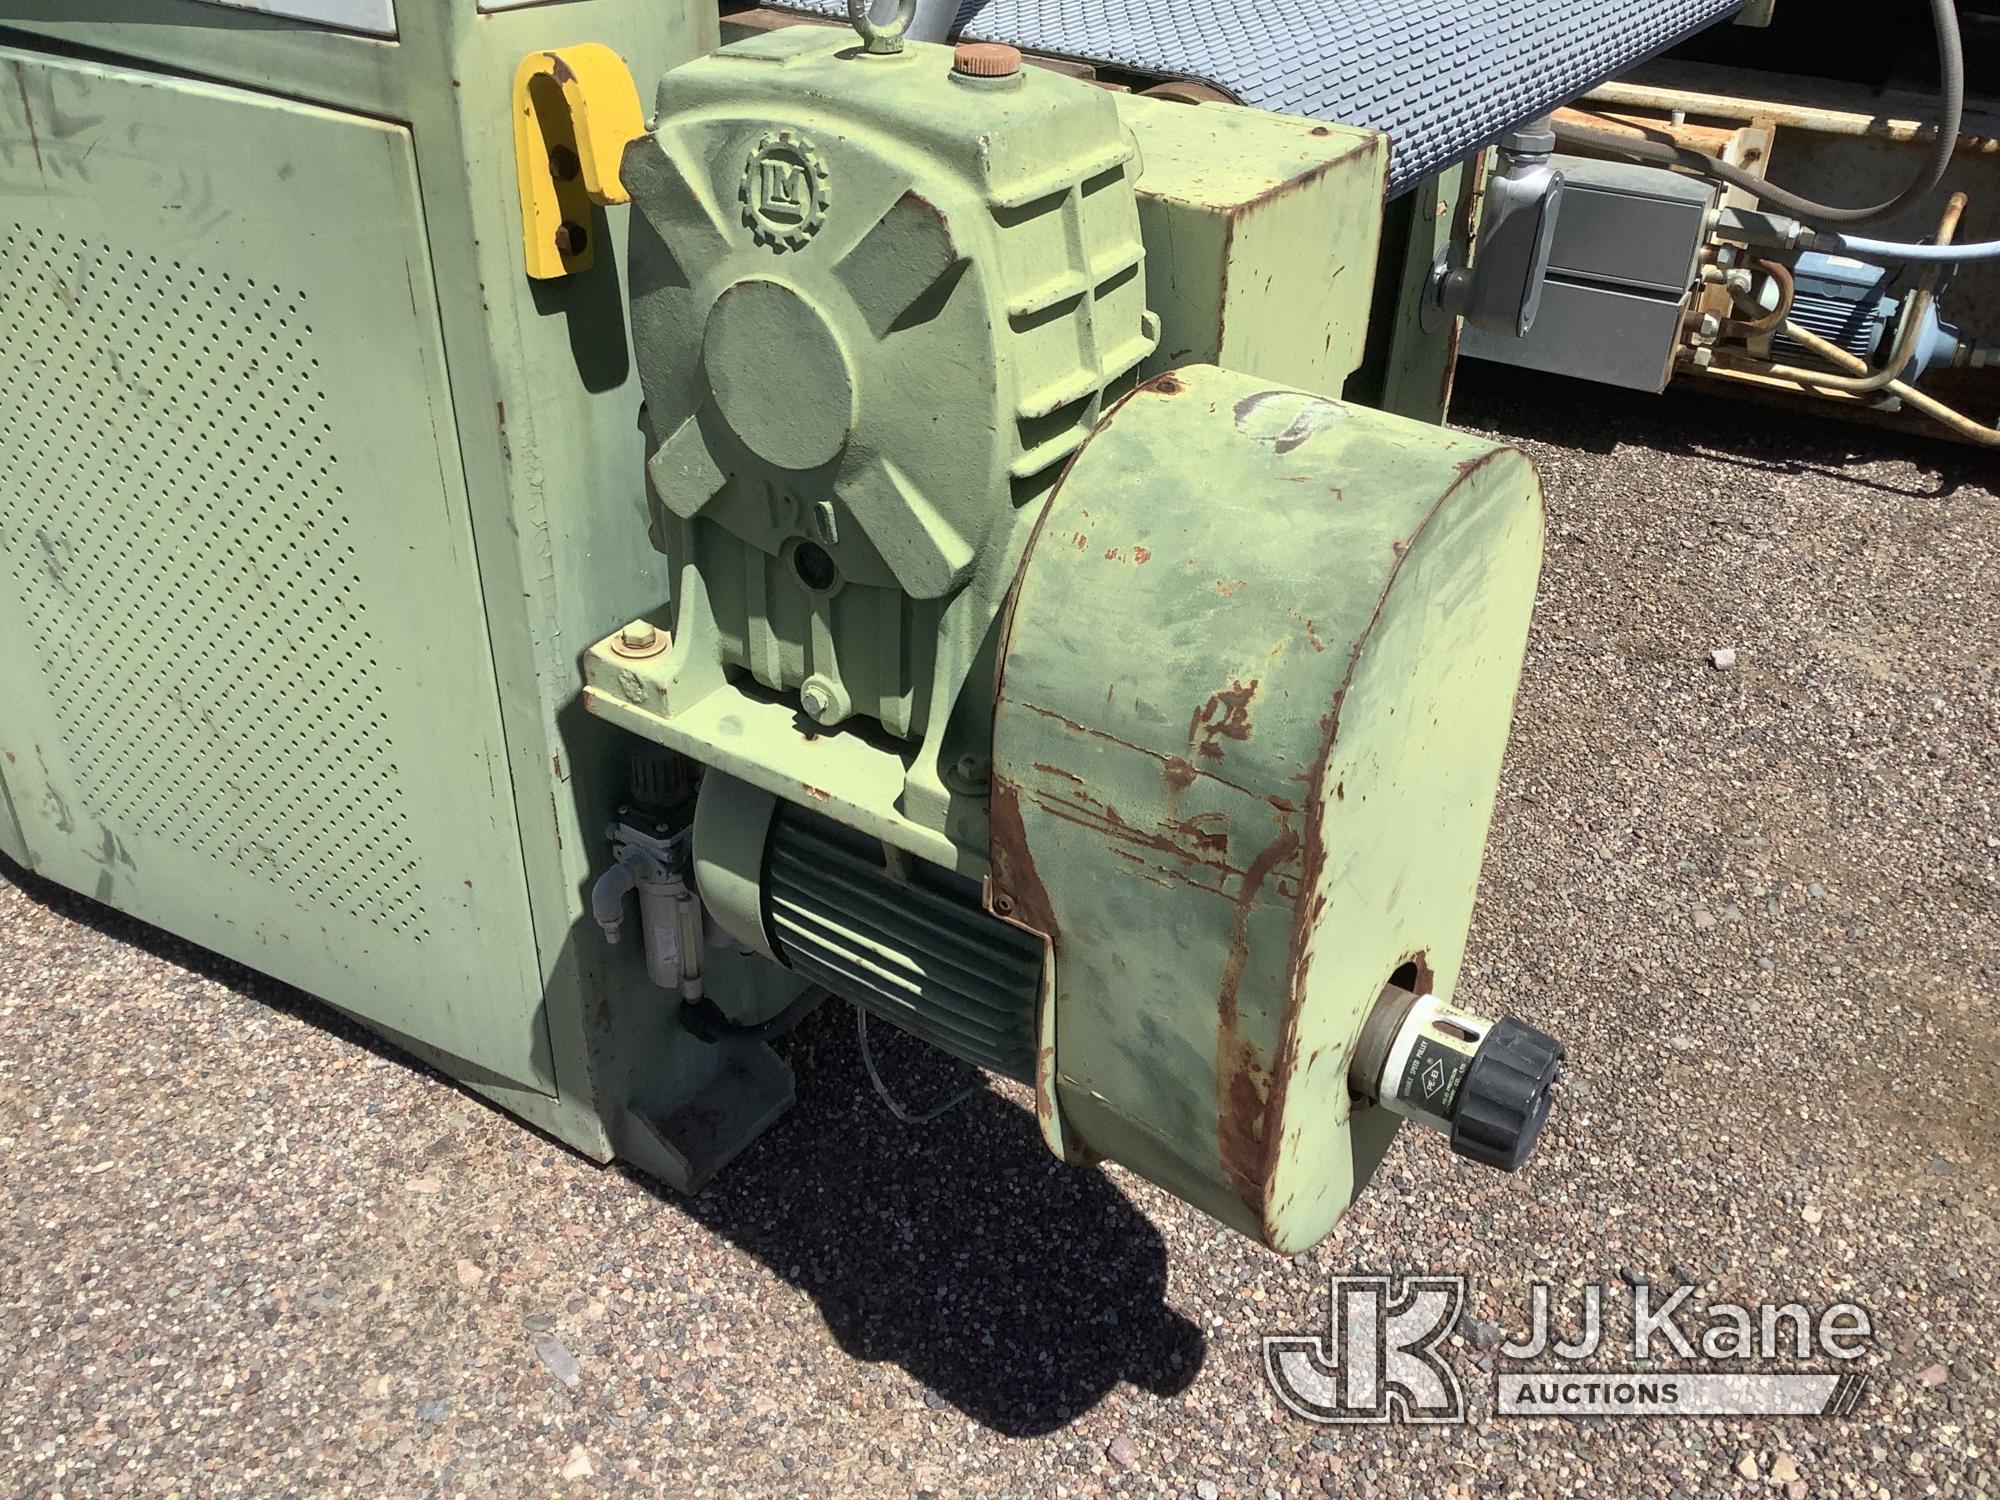 (Phoenix, AZ) Misc. Machinery (Condition Unknown) NOTE: This unit is being sold AS IS/WHERE IS via T